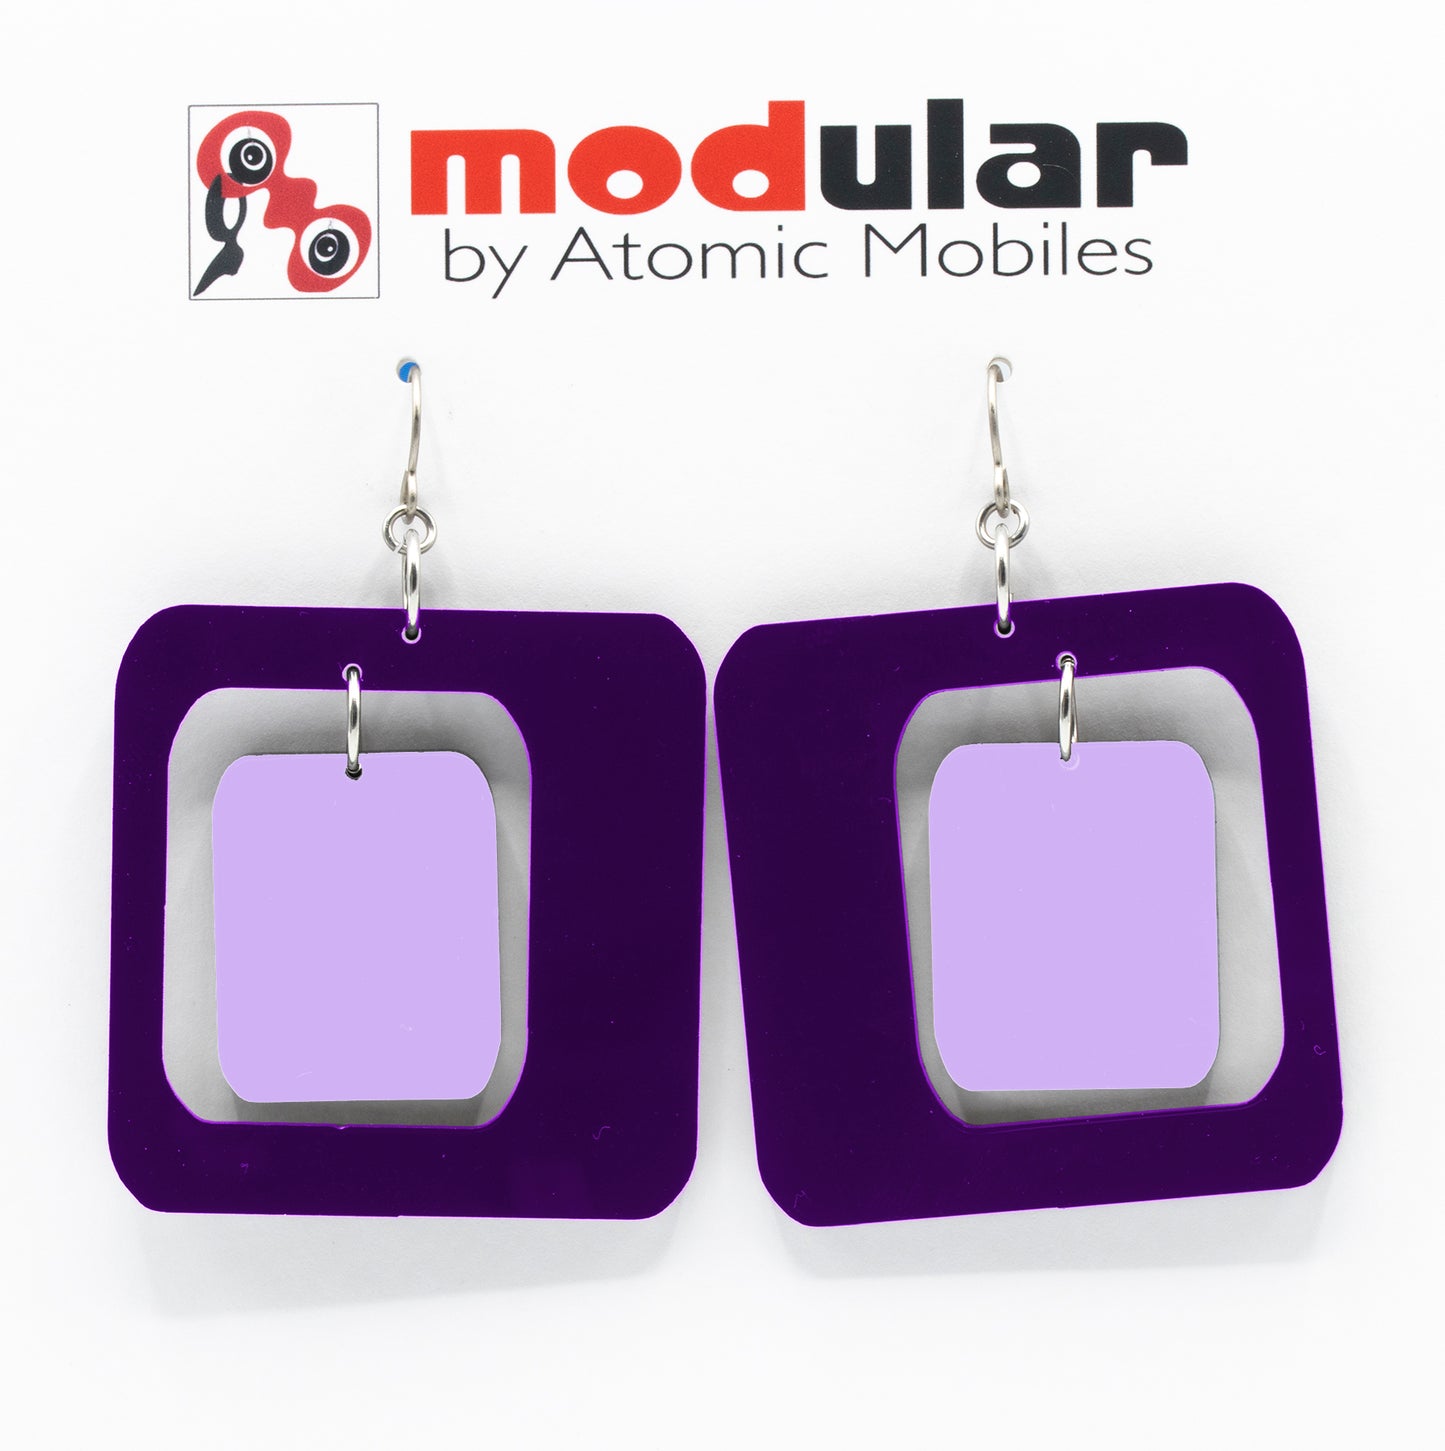 MODular Earrings - Coolsville Statement Earrings in Purple by AtomicMobiles.com - retro era inspired mod handmade jewelry